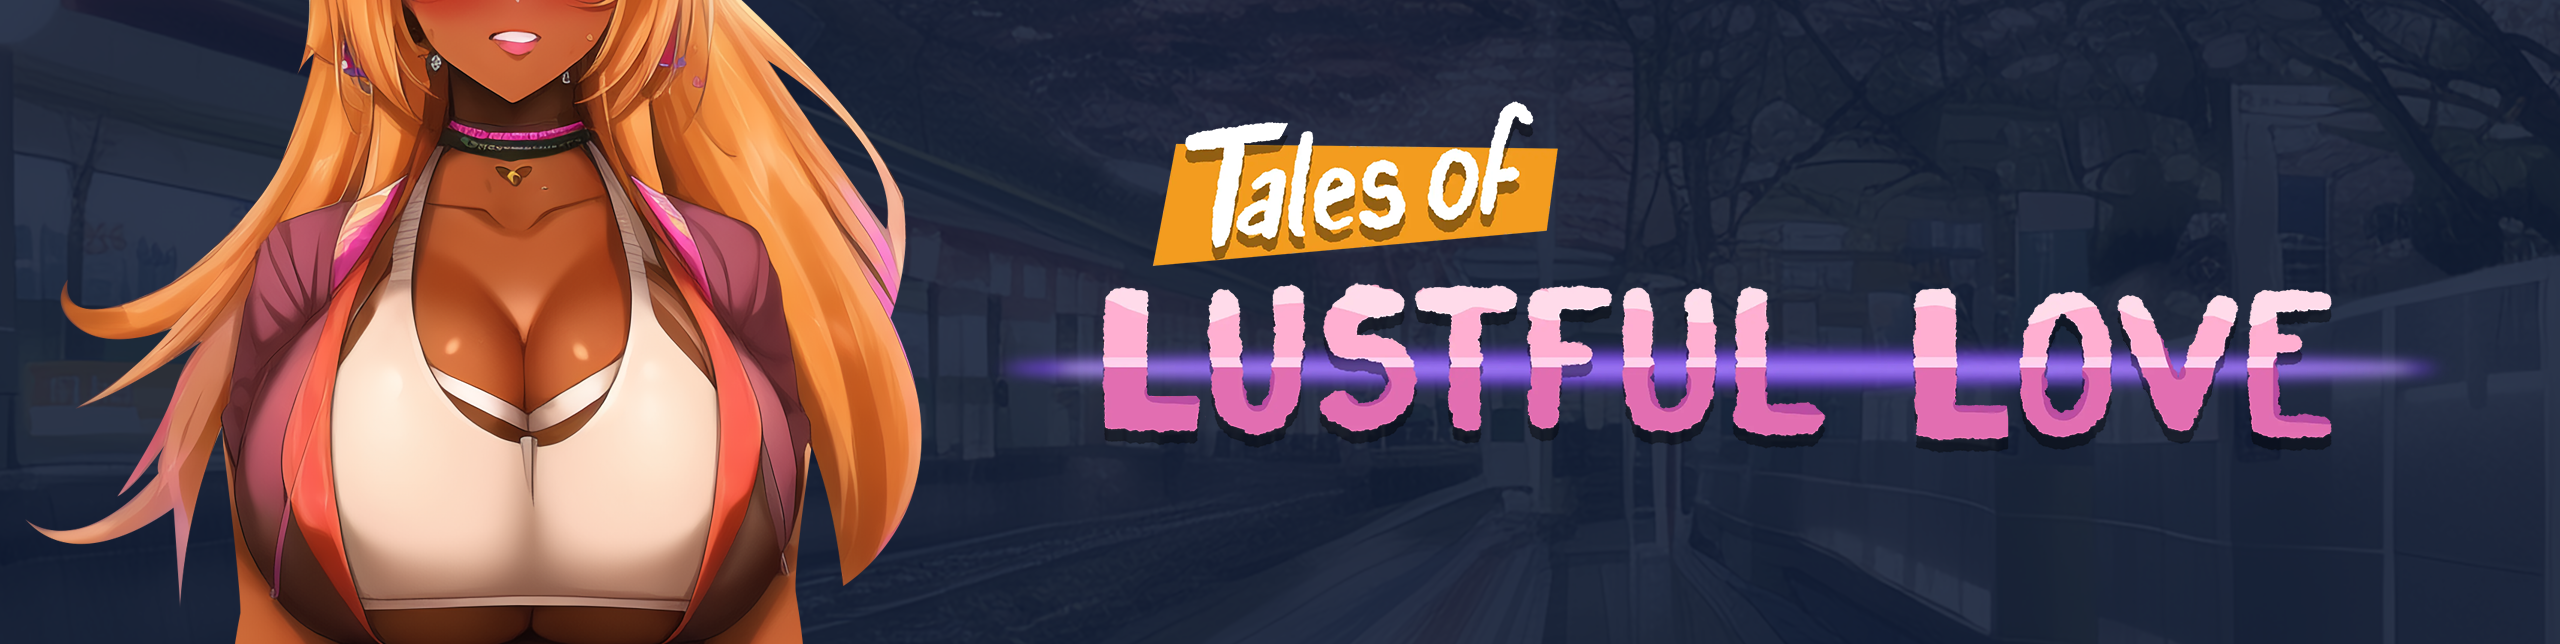 Tales of Lustful Love poster